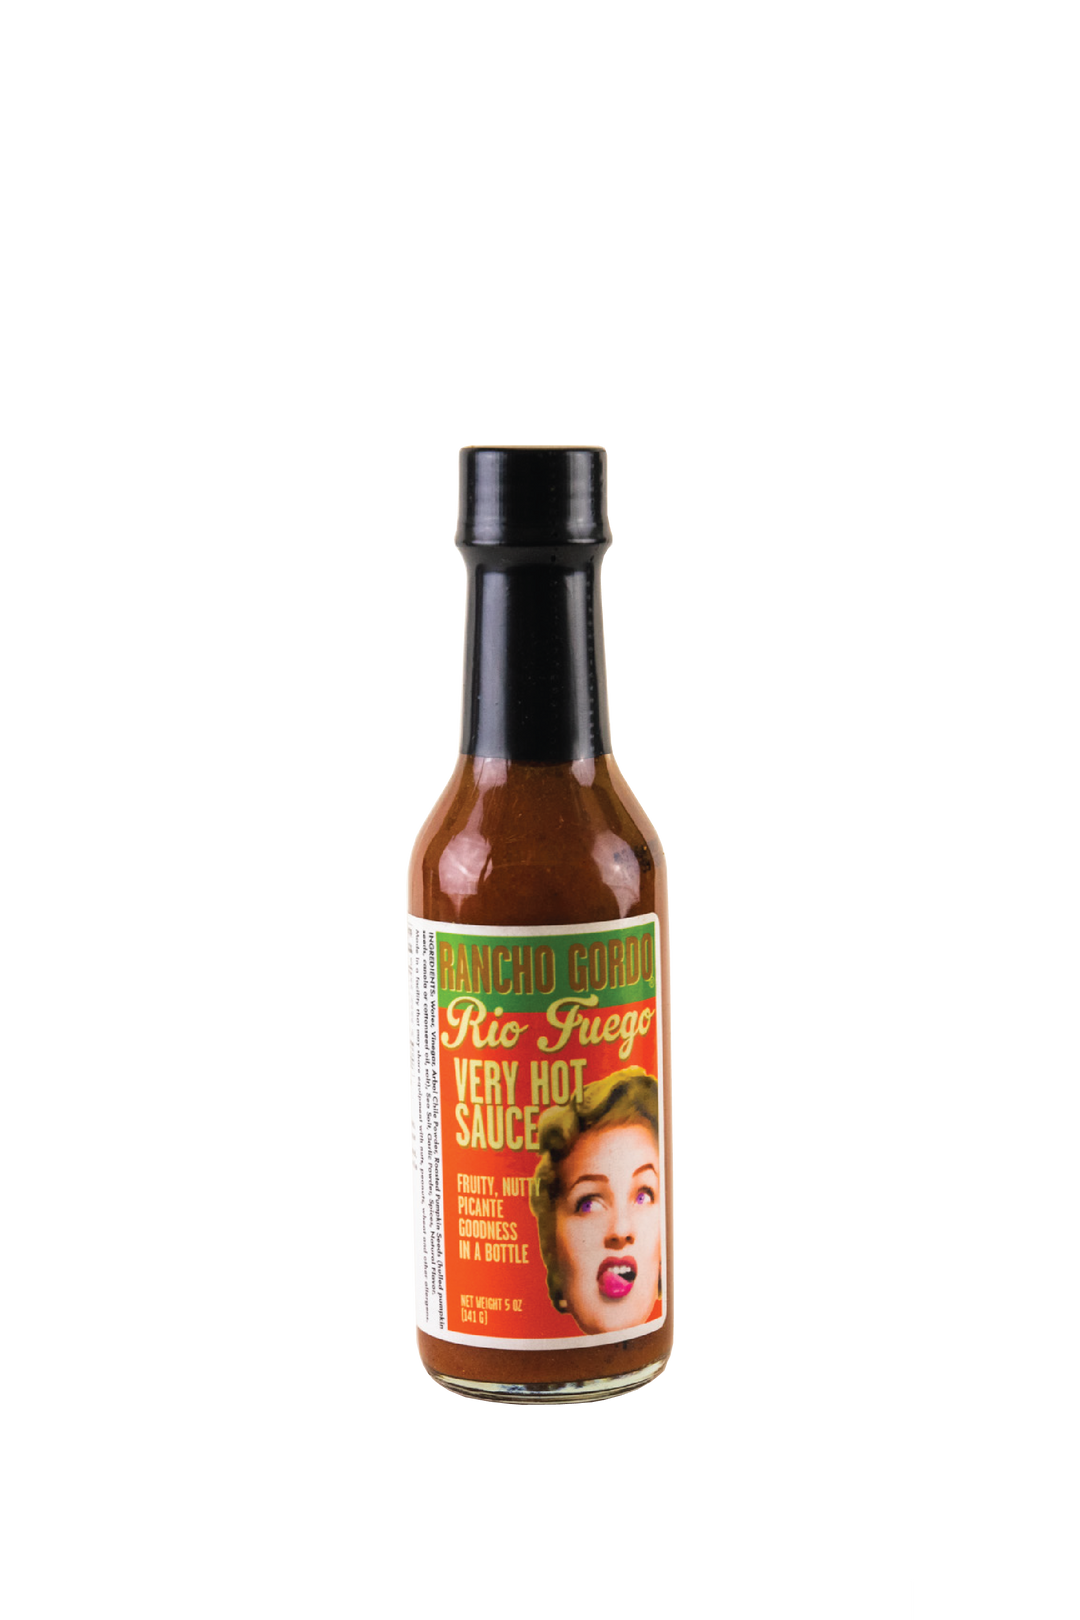 Image of a 5 oz bottle of Rancho Gordo Rio Fuego Very Hot Sauce on a white background. Green, yellow, and orange label with an image of the face of a woman licking her upper lip. Additional text on bottle reads: Fruity, nutty, picante goodness in a bottle.